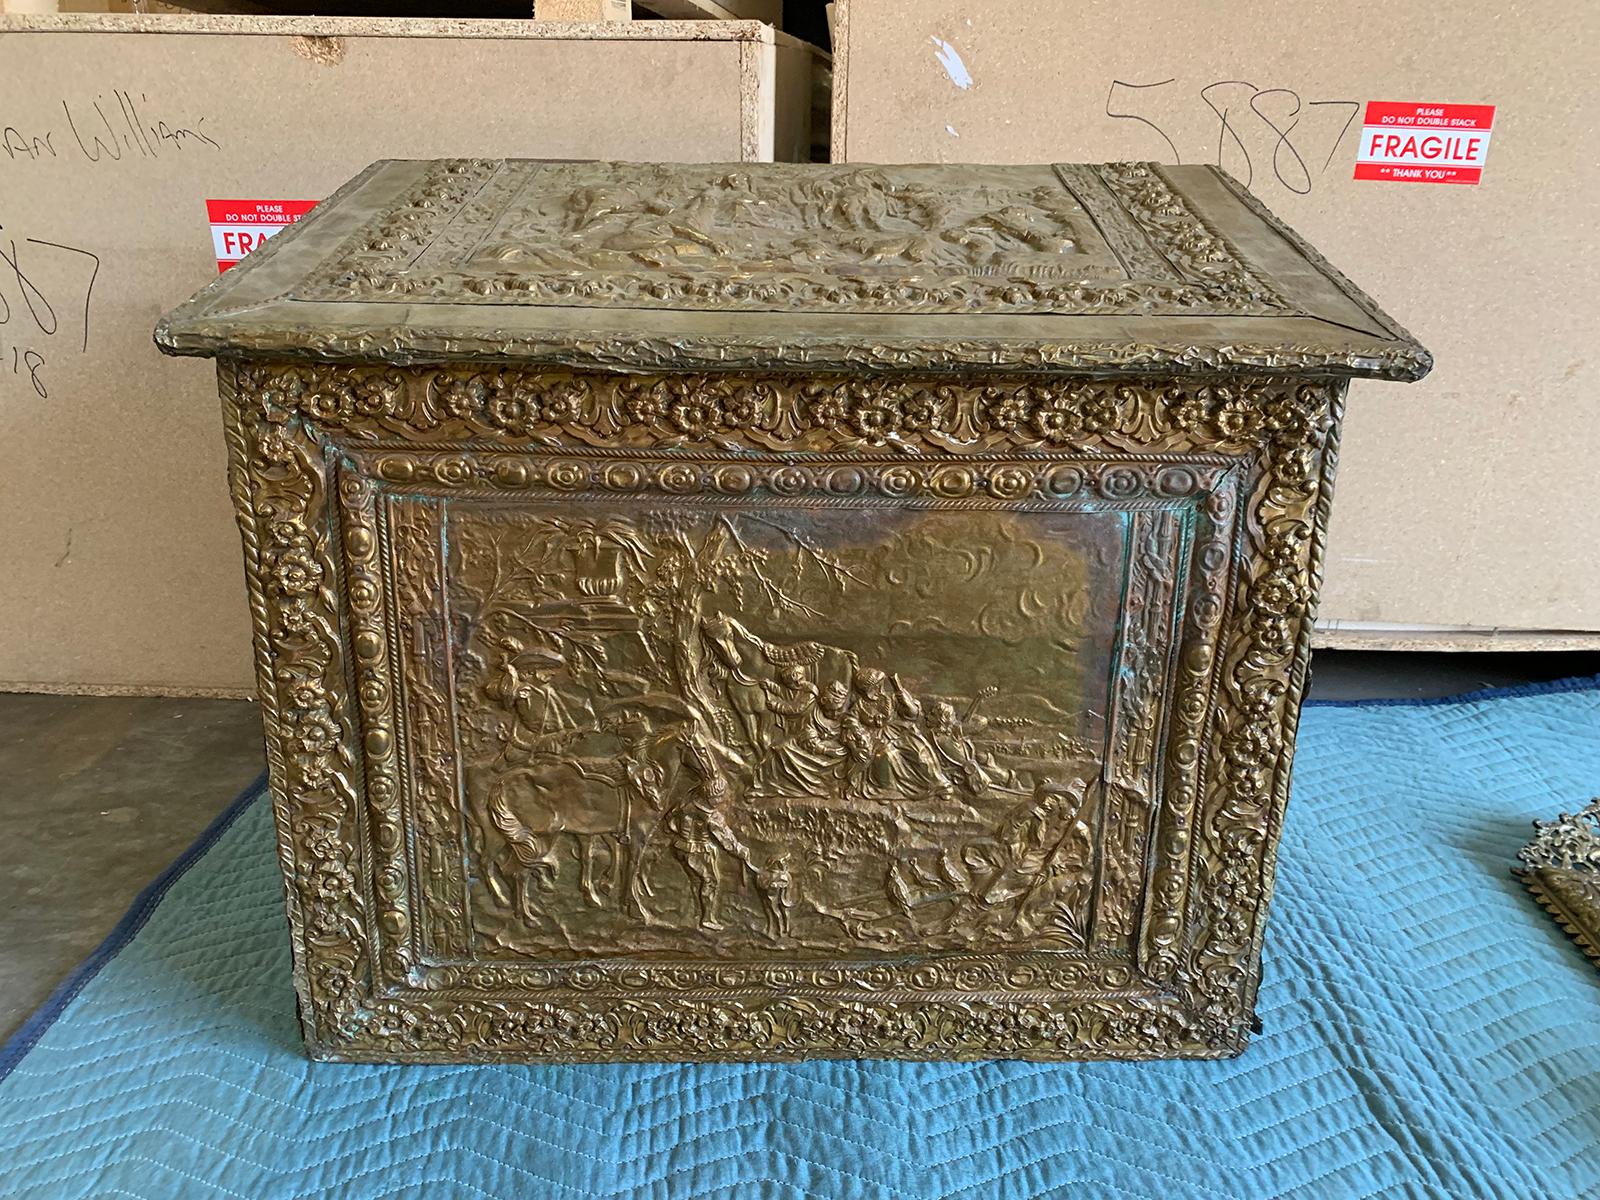 18th-19th century wooden box with brass repoussé.